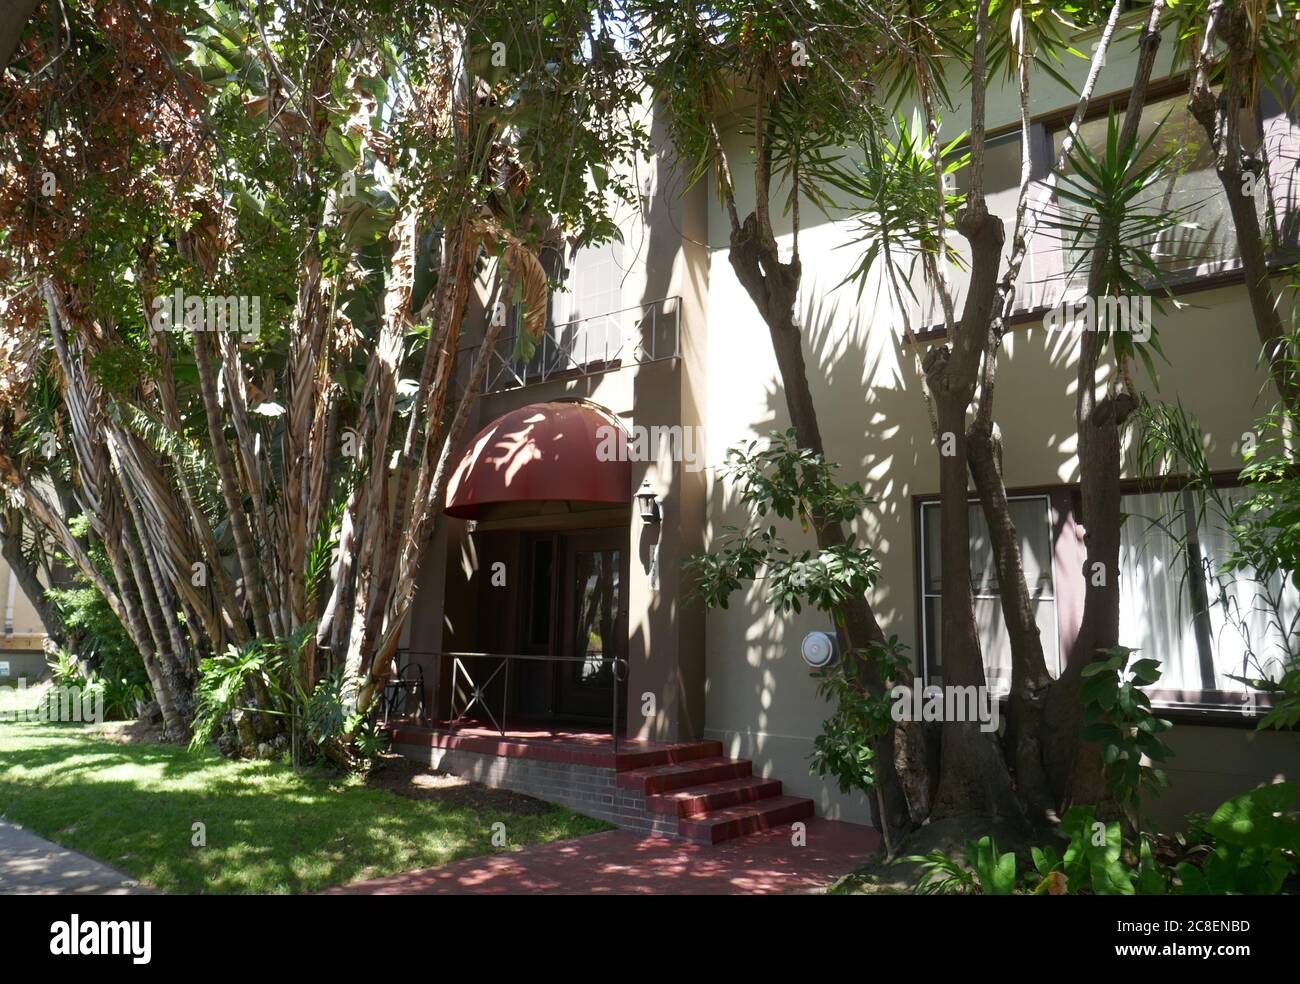 Los Angeles, California, USA 23rd July 2020 A general view of atmosphere of British Model Ronald Anthony Margau, aka Ron Marquette's apartment where he committed suicide (September 27, 1994) in front of girlfriend Dee Dee Pfeiffer at 1438 N. Gardner Street, on July 23, 2020 in Los Angeles, California, USA. Photo by Barry King/Alamy Stock Photo Stock Photo